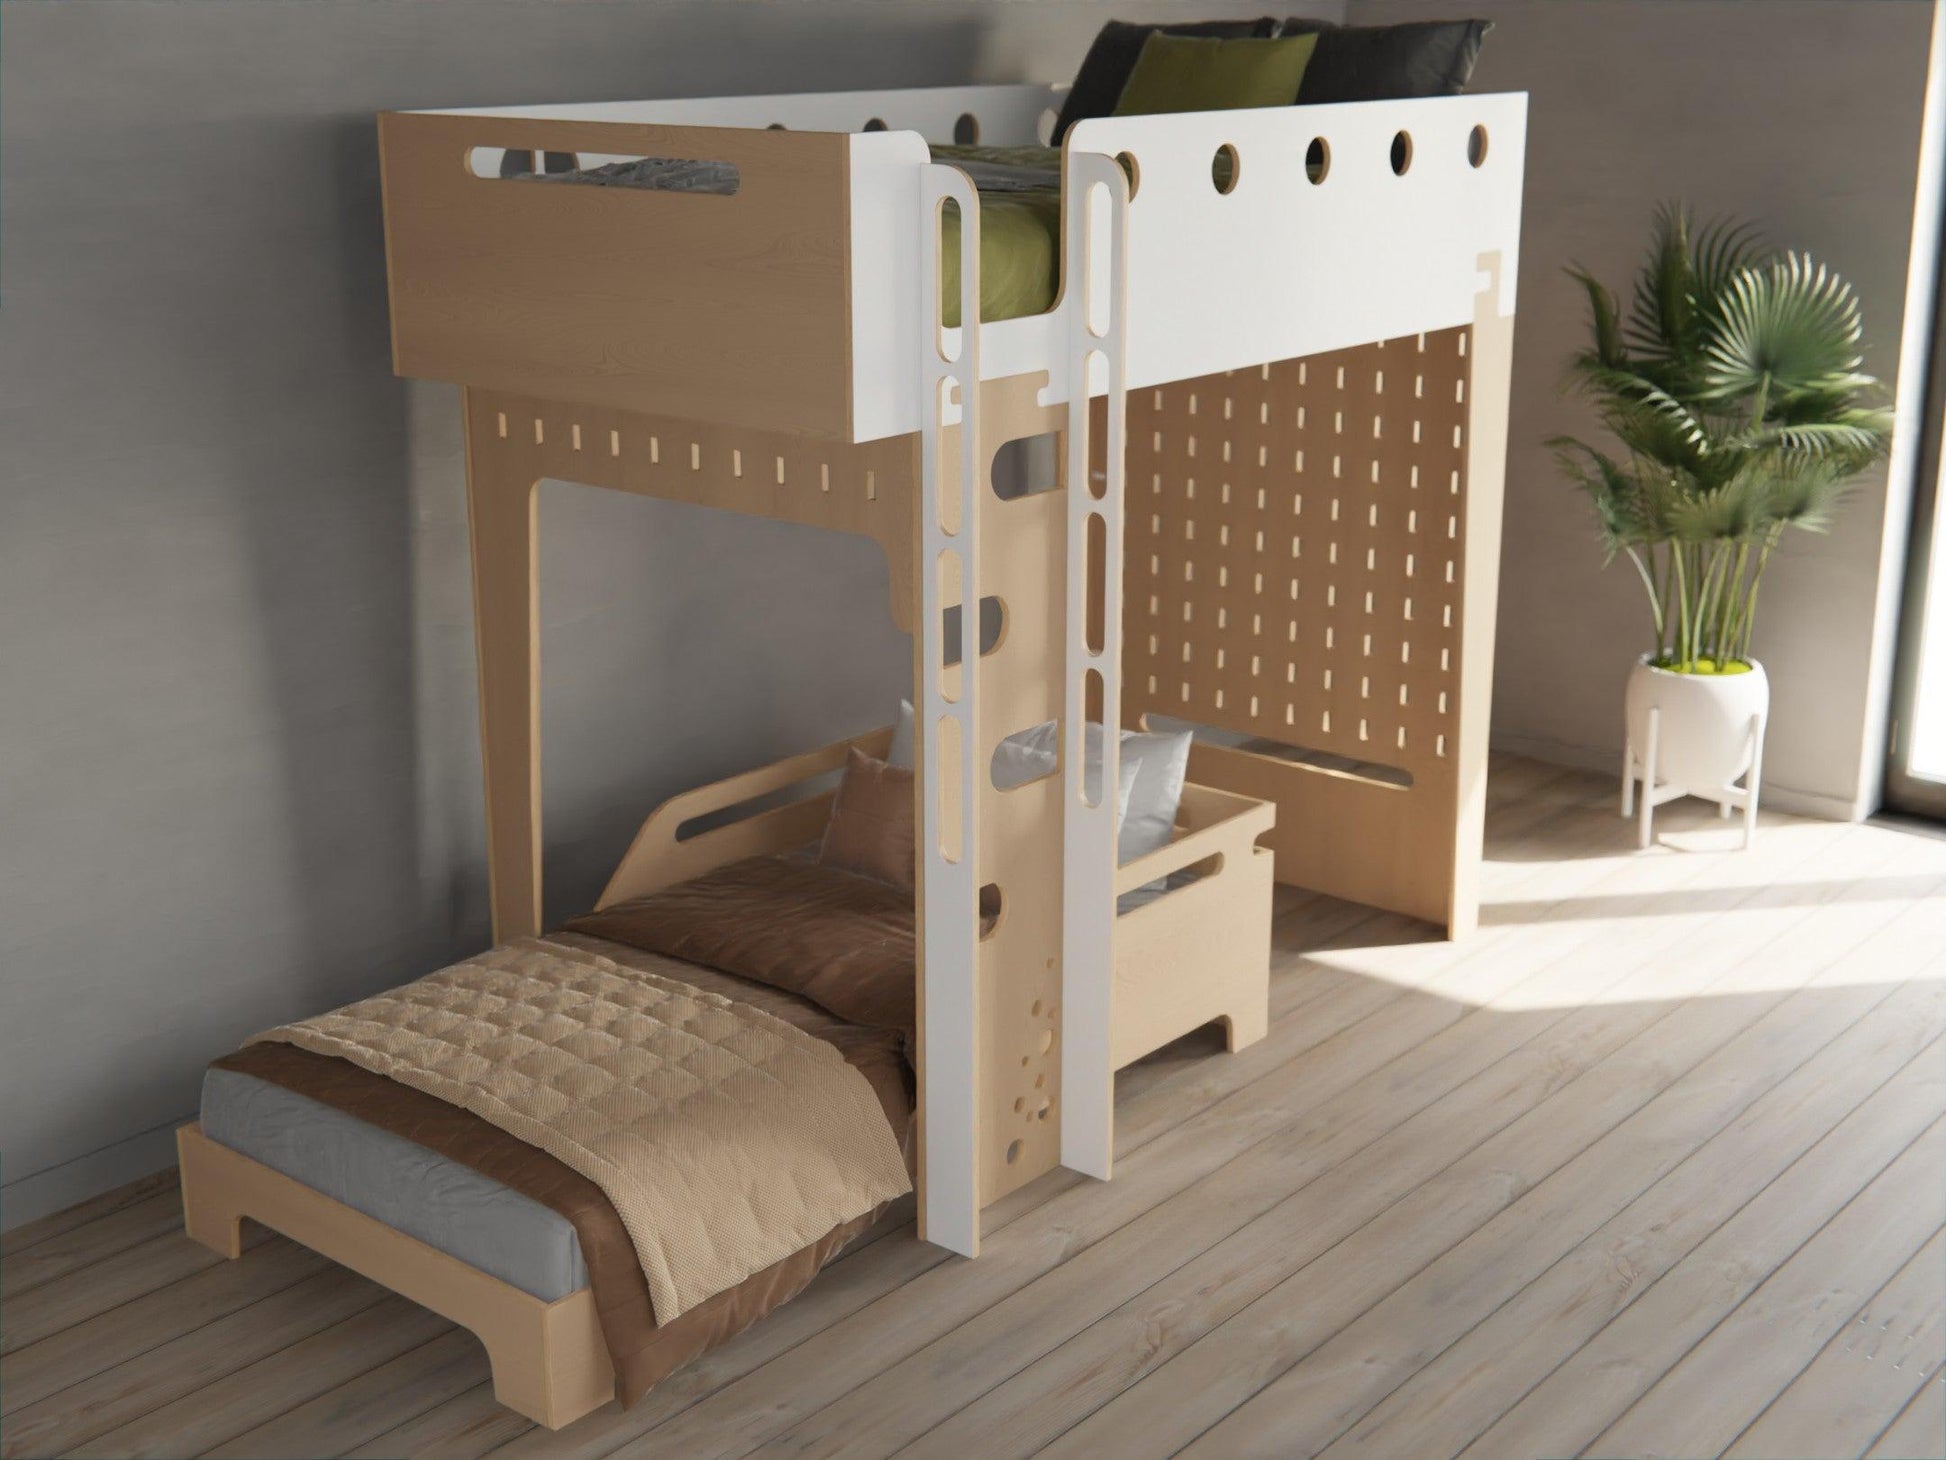 Maximize functionality with our plywood loft bed, complete with study desk. Designed for kids.